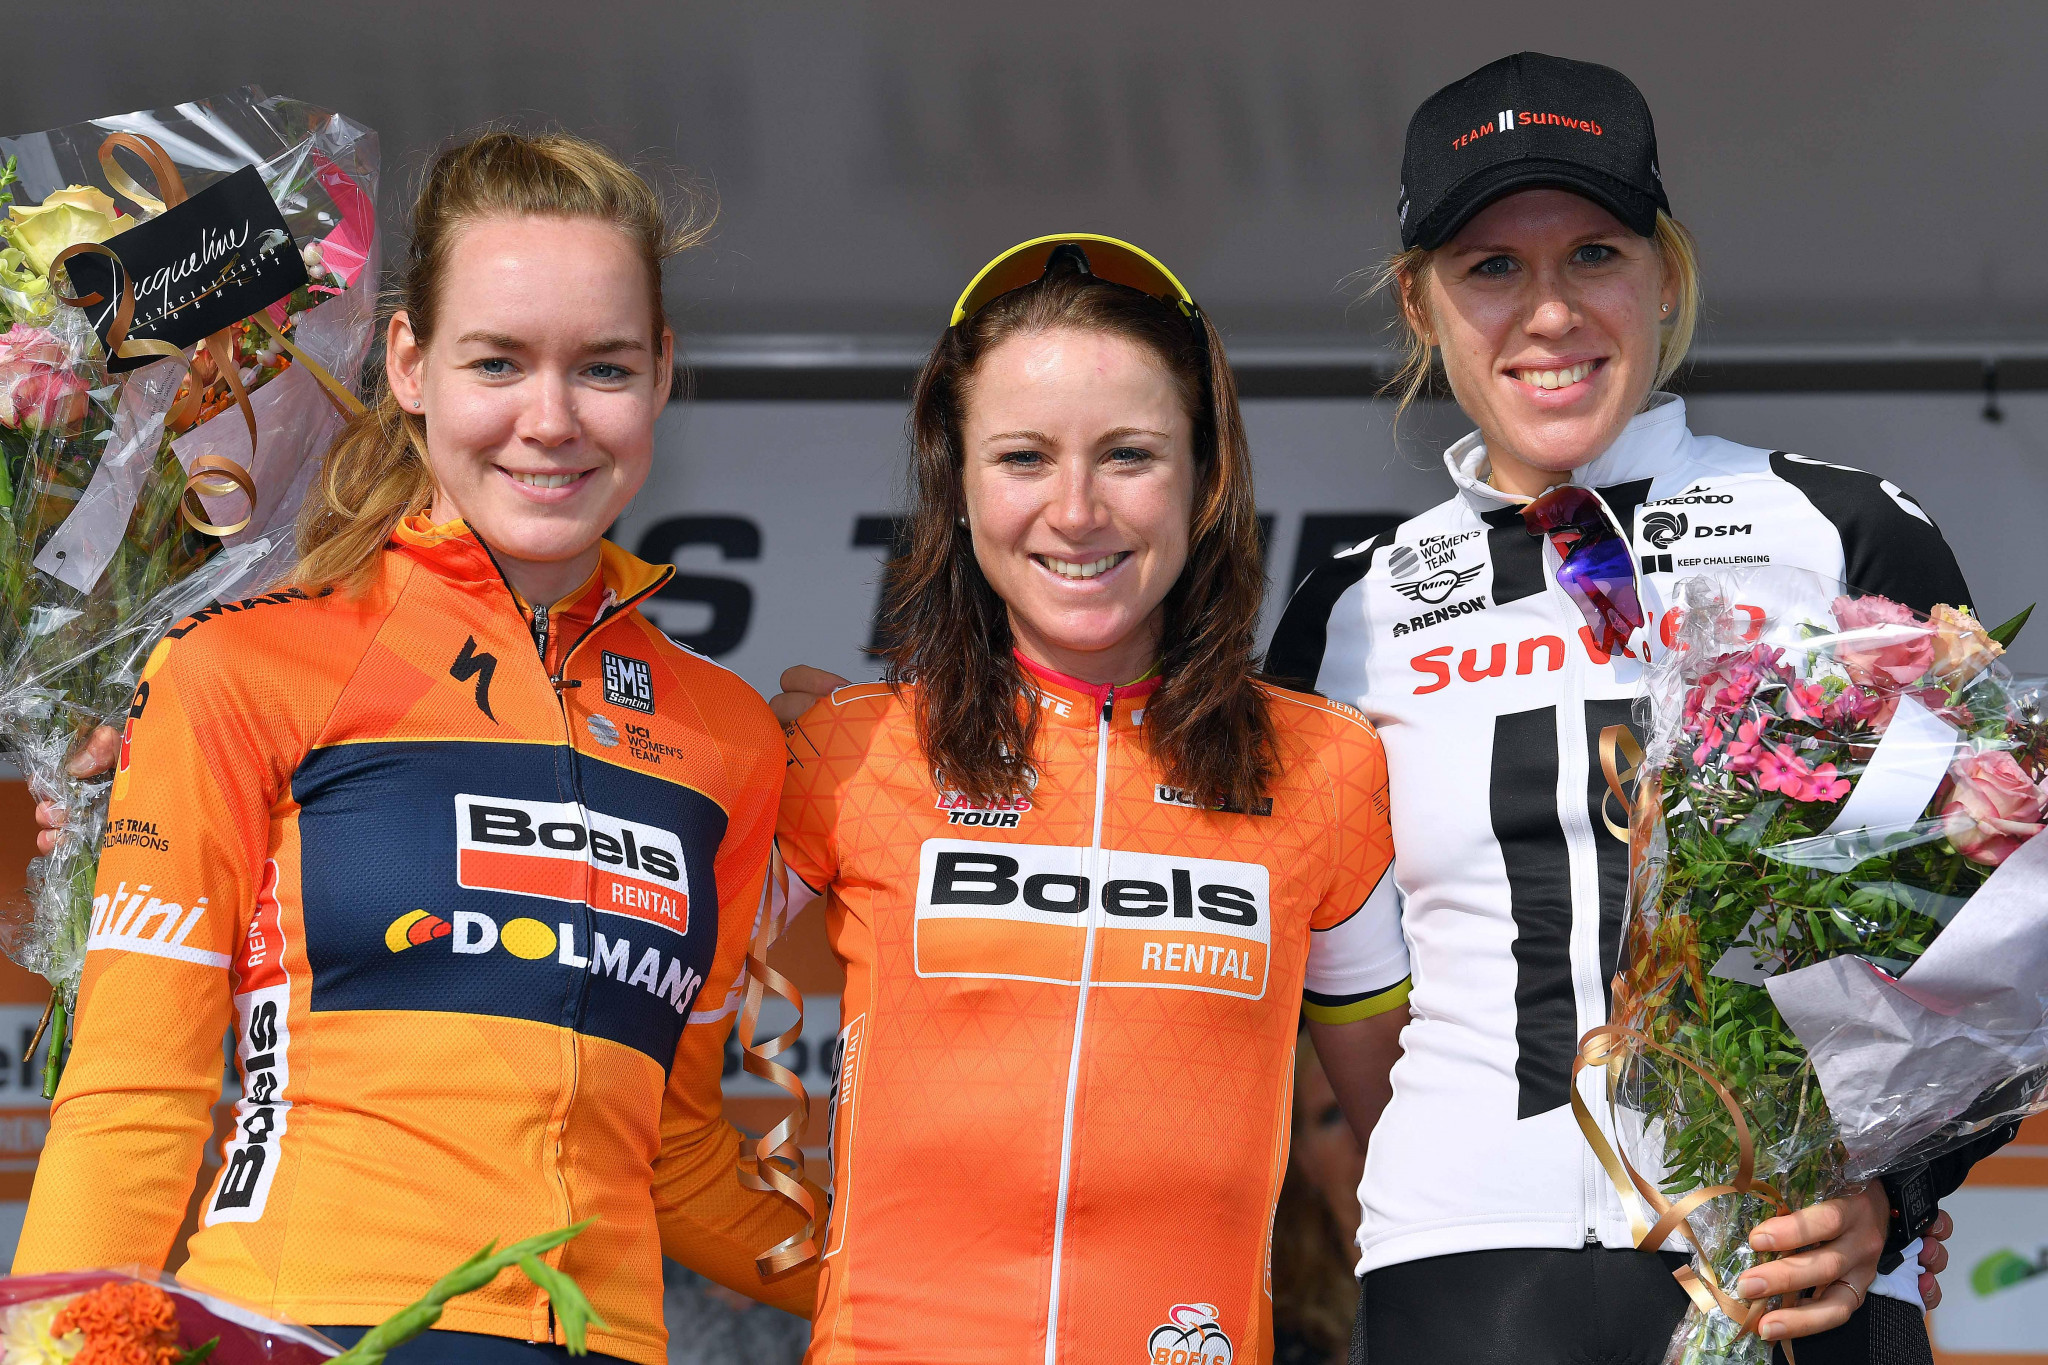 Dutch rider Annemiek van Vleuten of the Orica-Scott team wrapped up the overall victory at the Ladies Tour of Holland ©GreenEdge